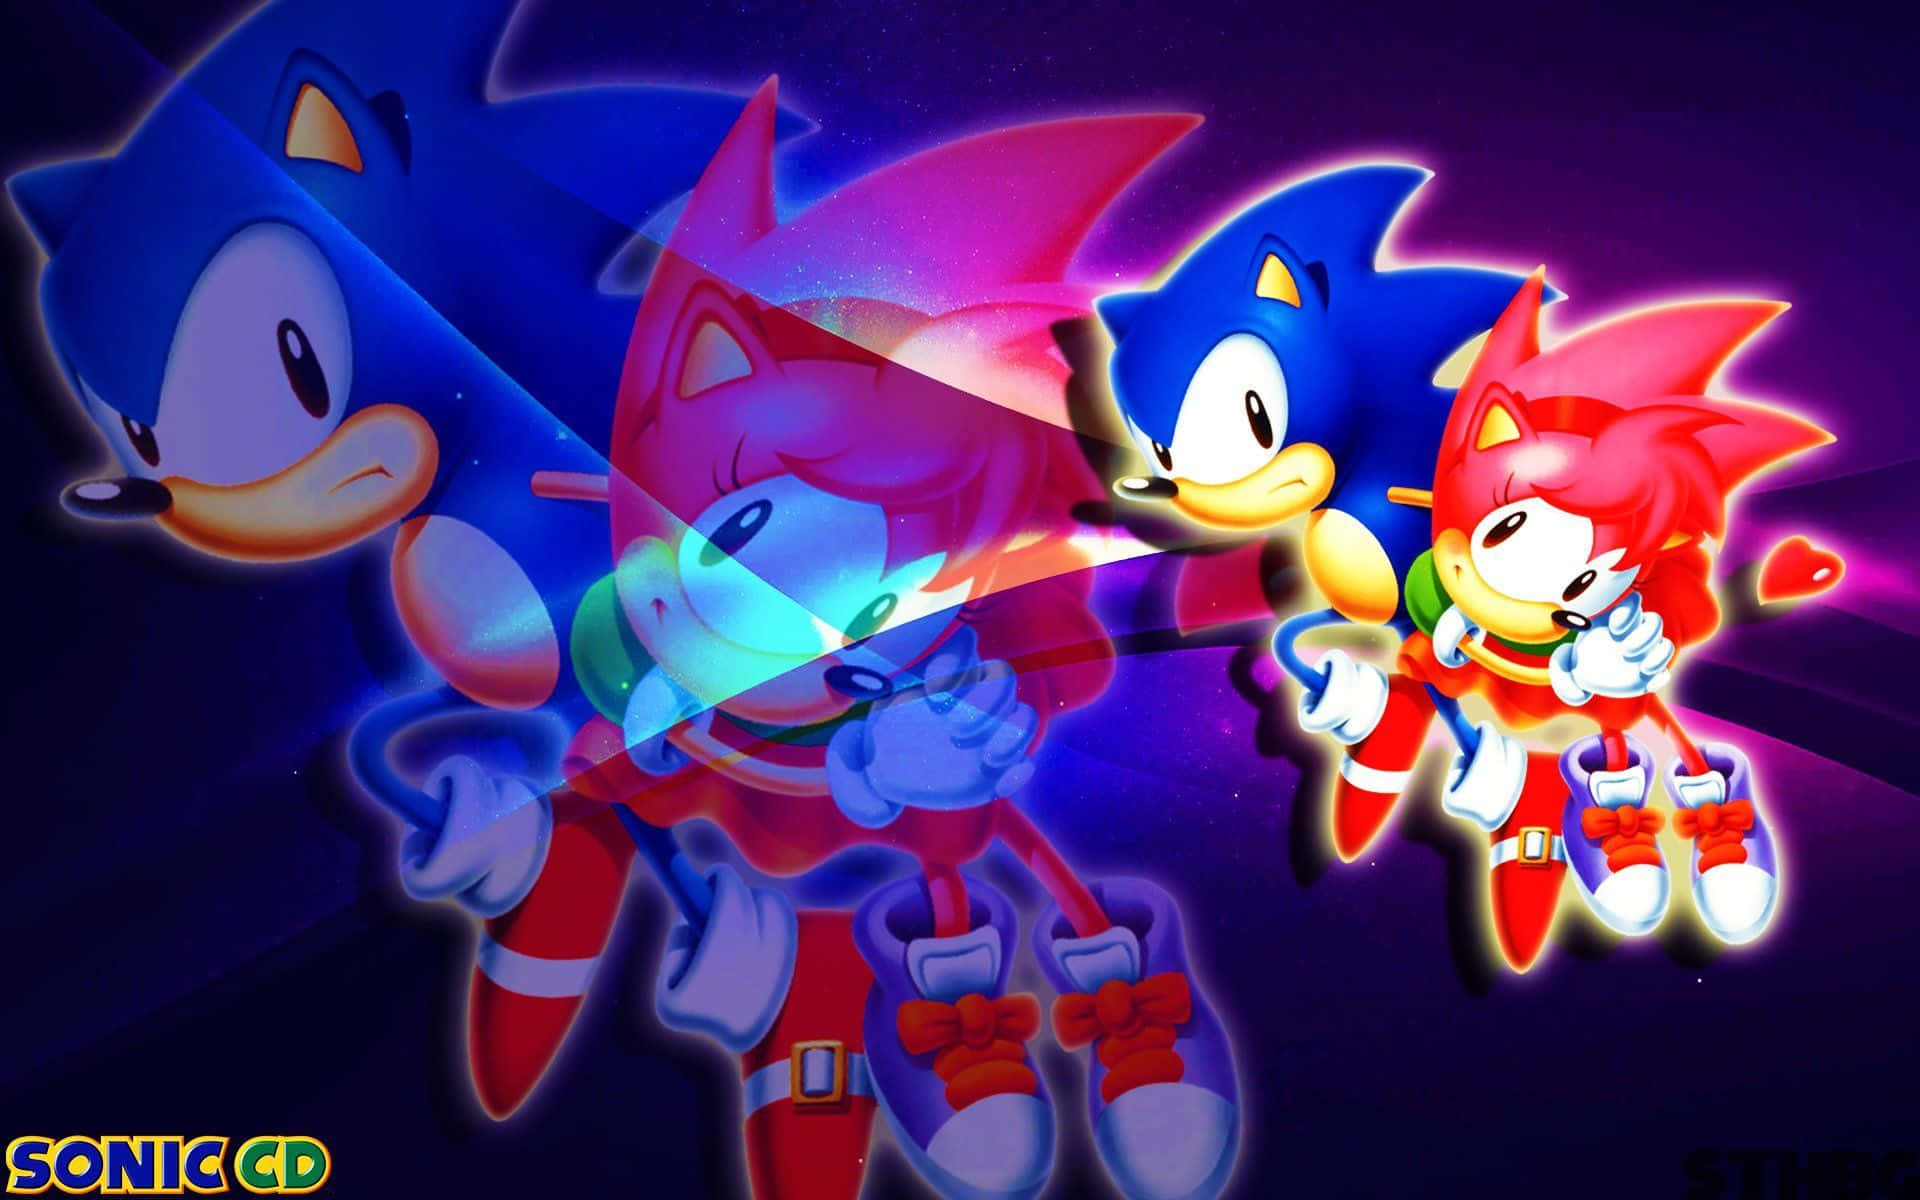 Sonic CD: Exciting Adventures in Time&Dimensions Wallpaper